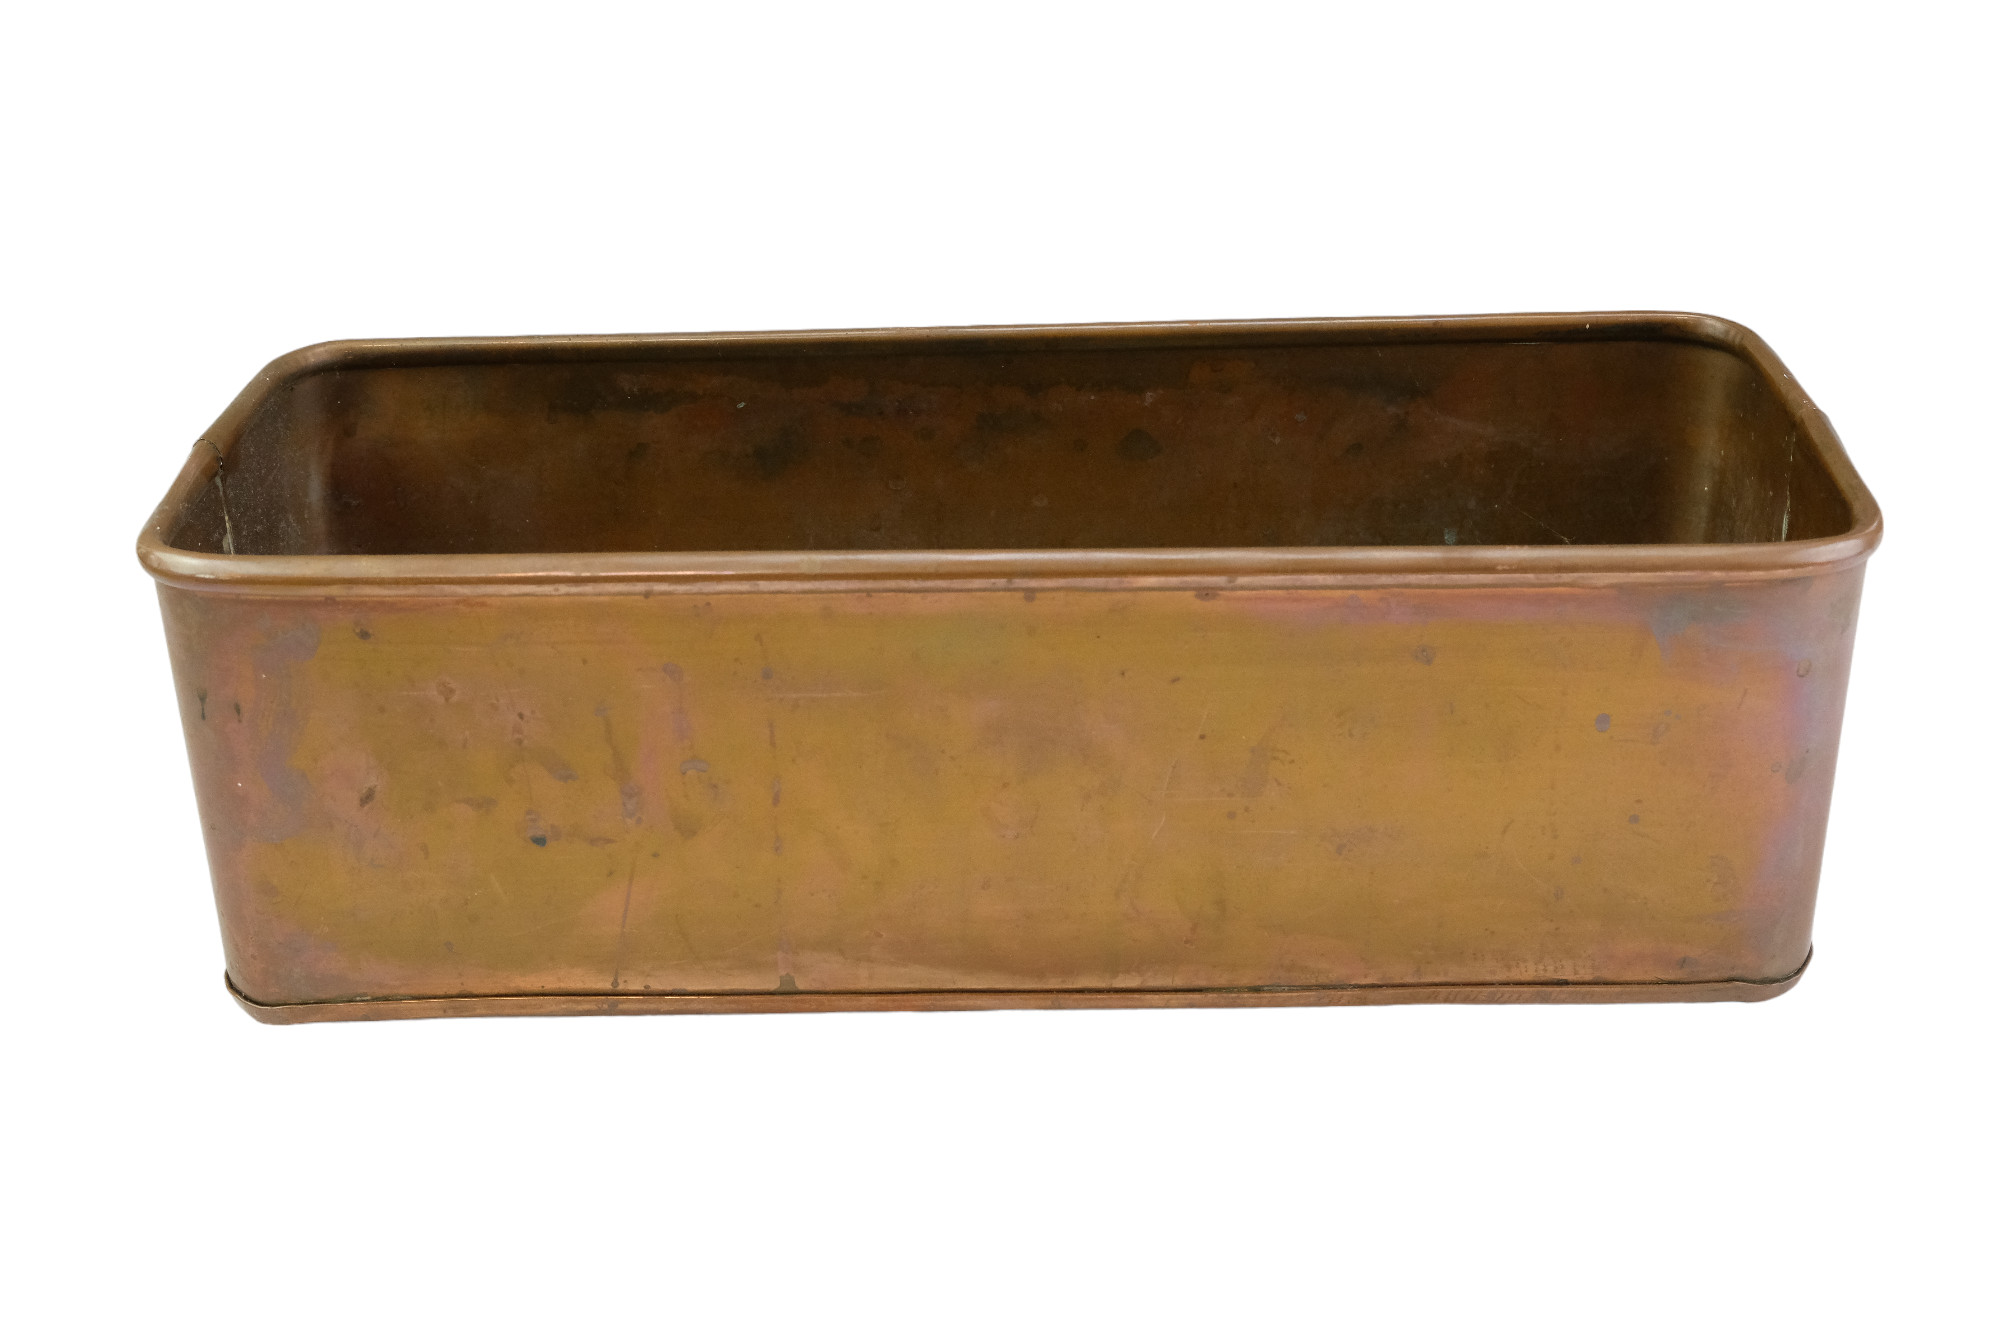 Brass and aluminium jam pans together with a copper planter - Image 3 of 3